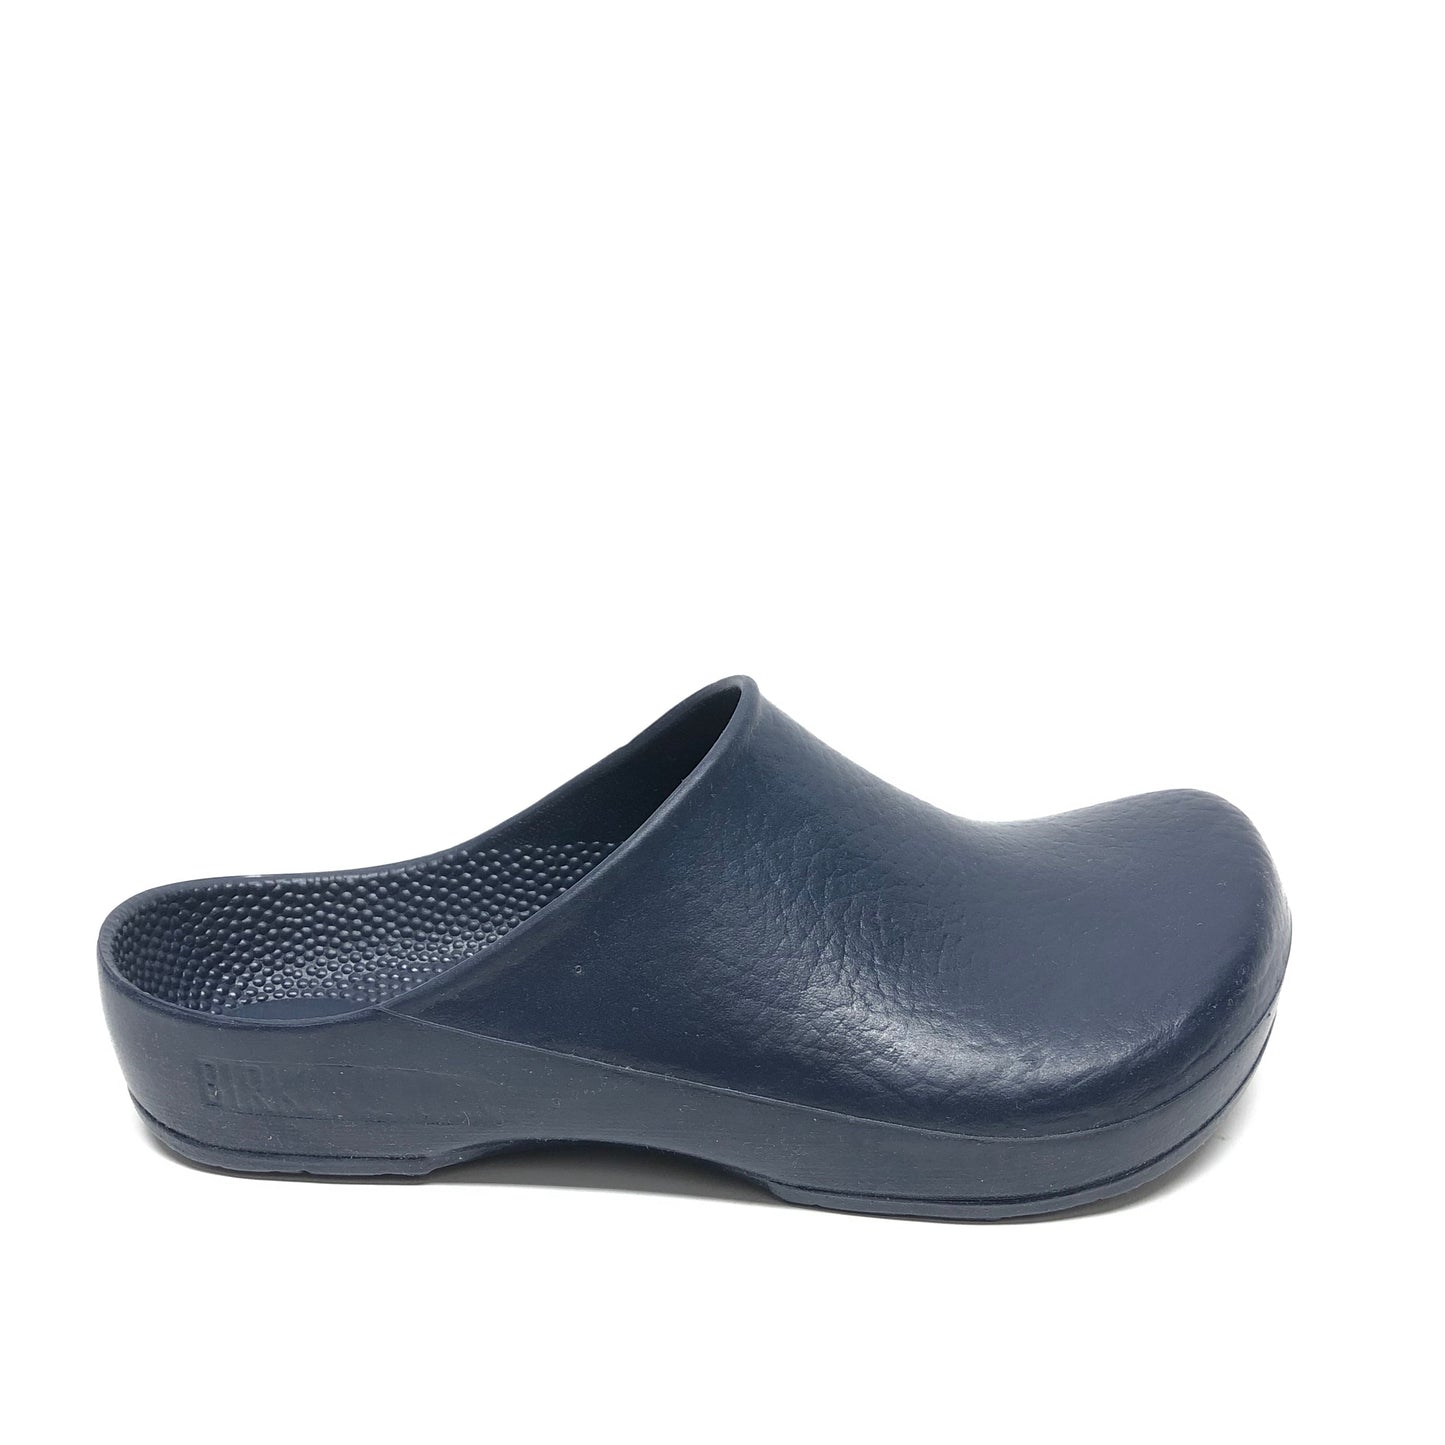 Shoes Flats By Birkenstock  Size: 6.5